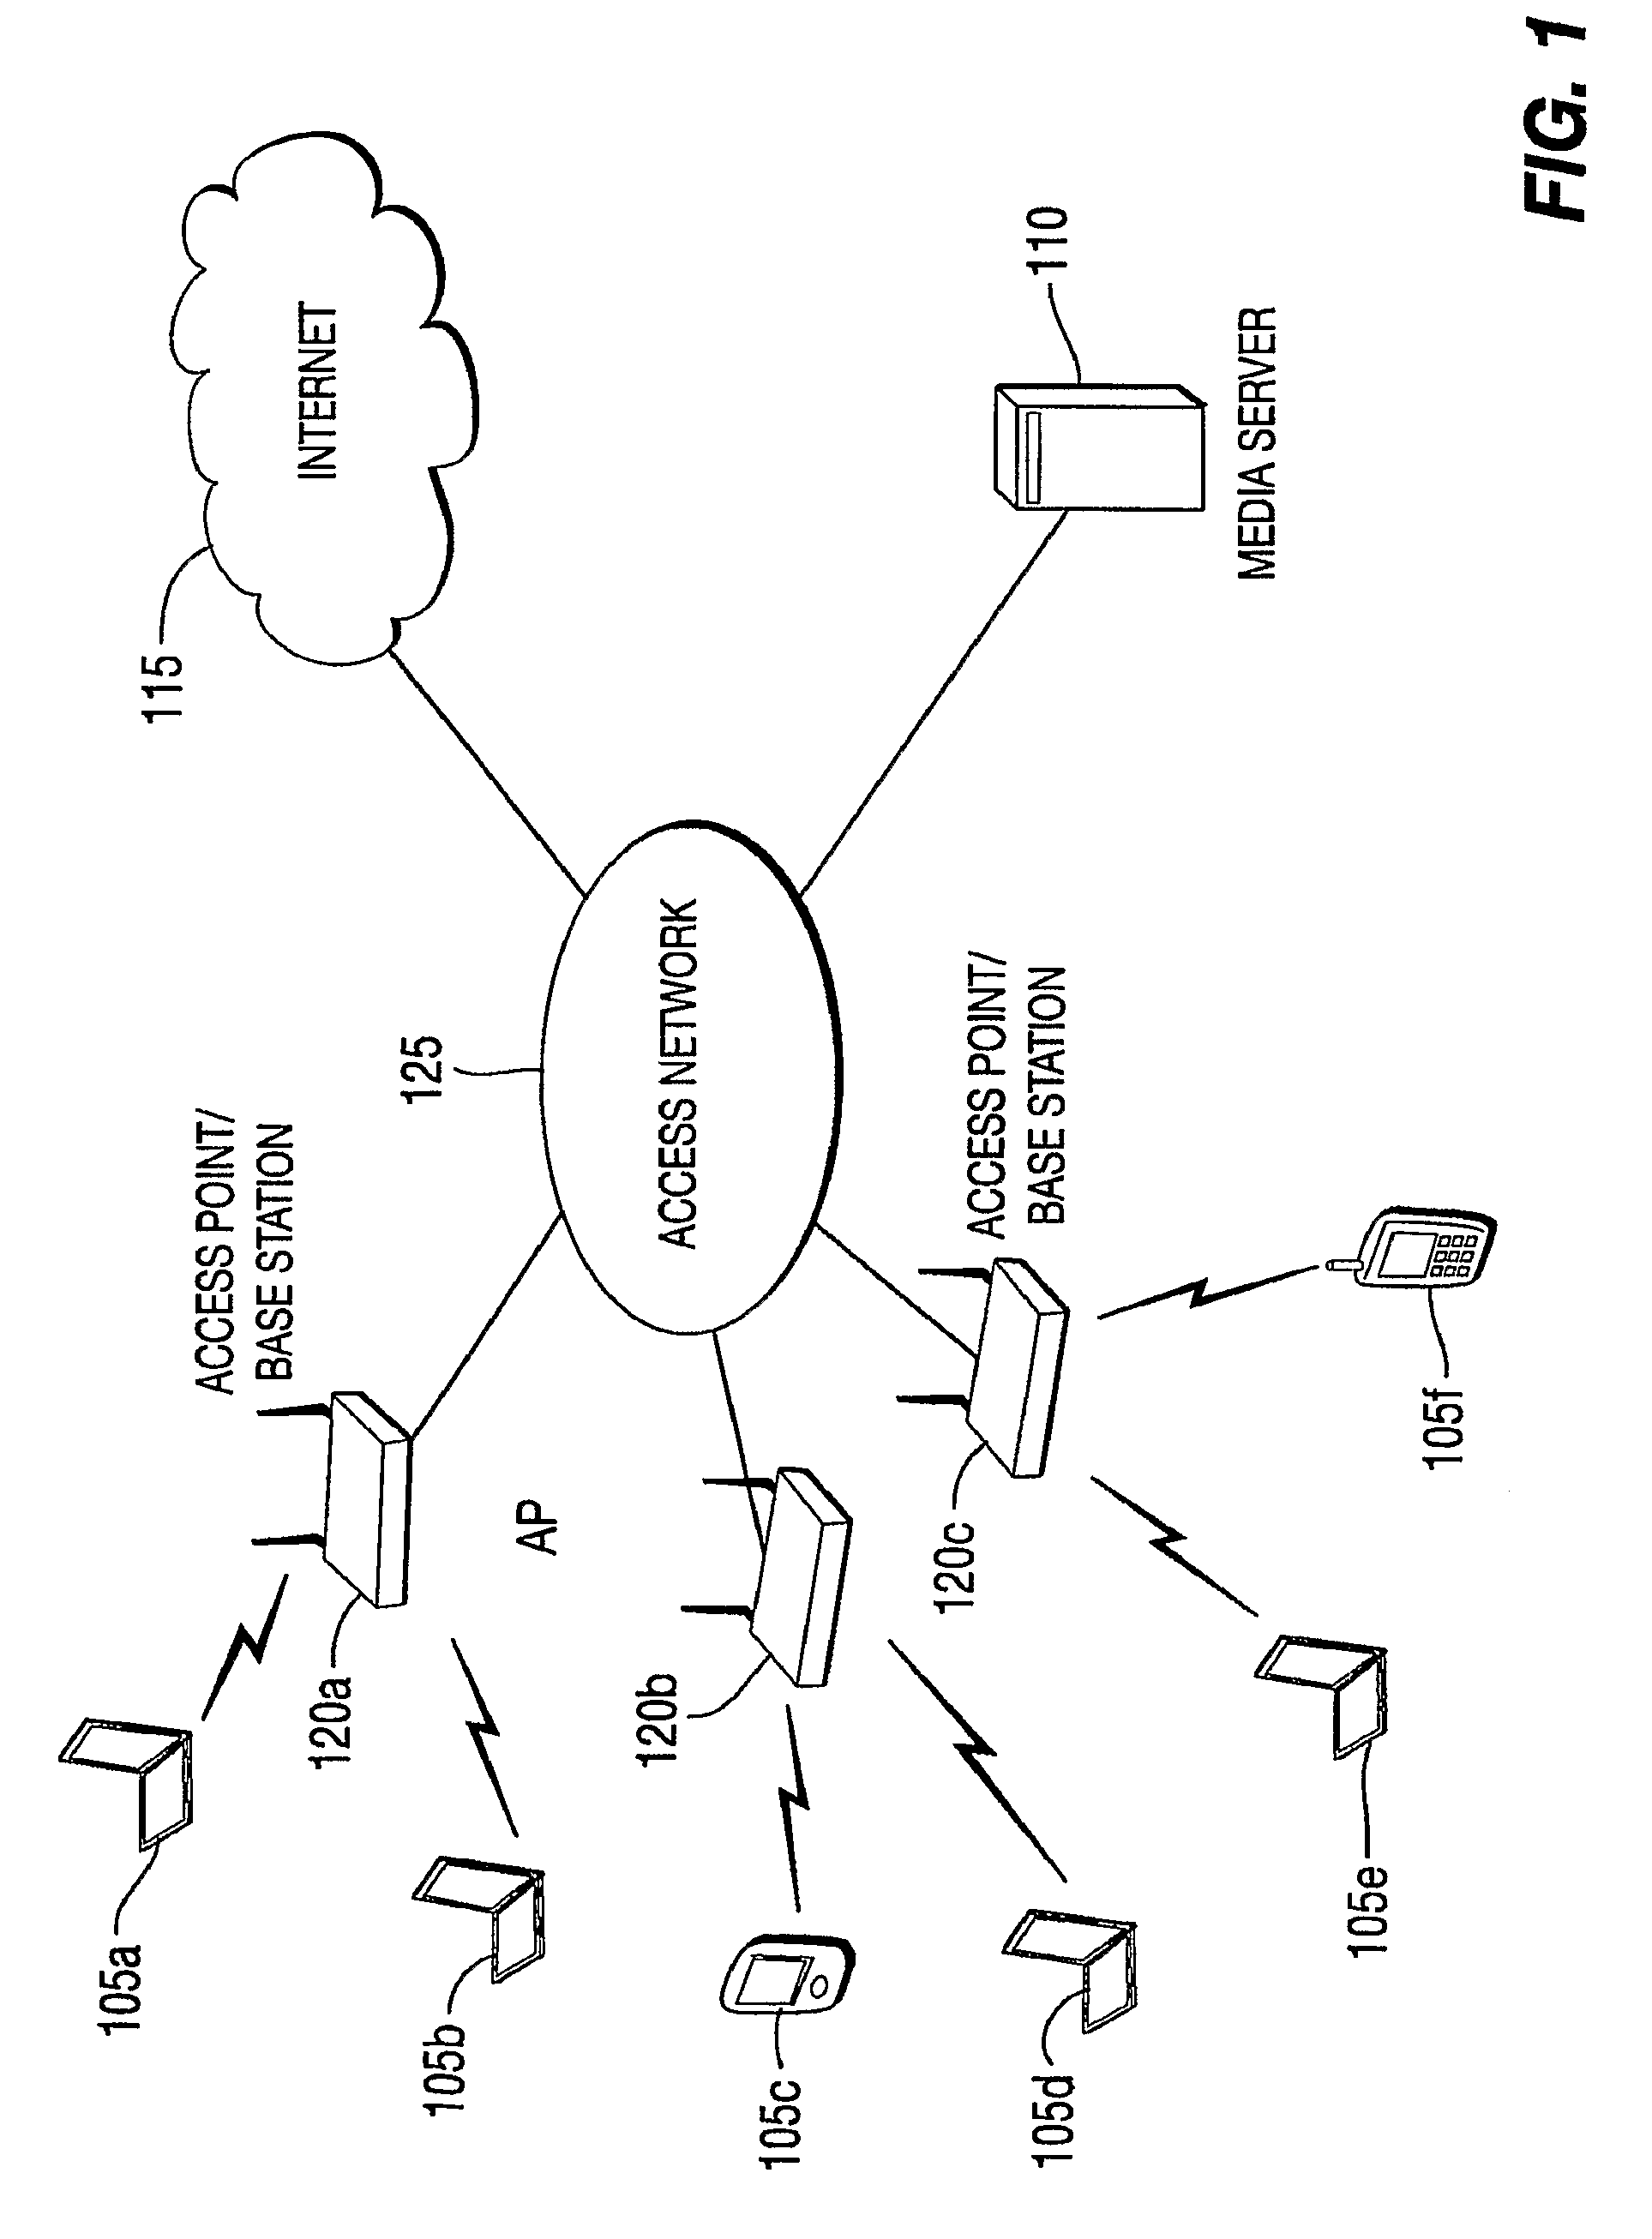 Method for efficient feedback of receiving channel conditions in adaptive video multicast and broadcast systems